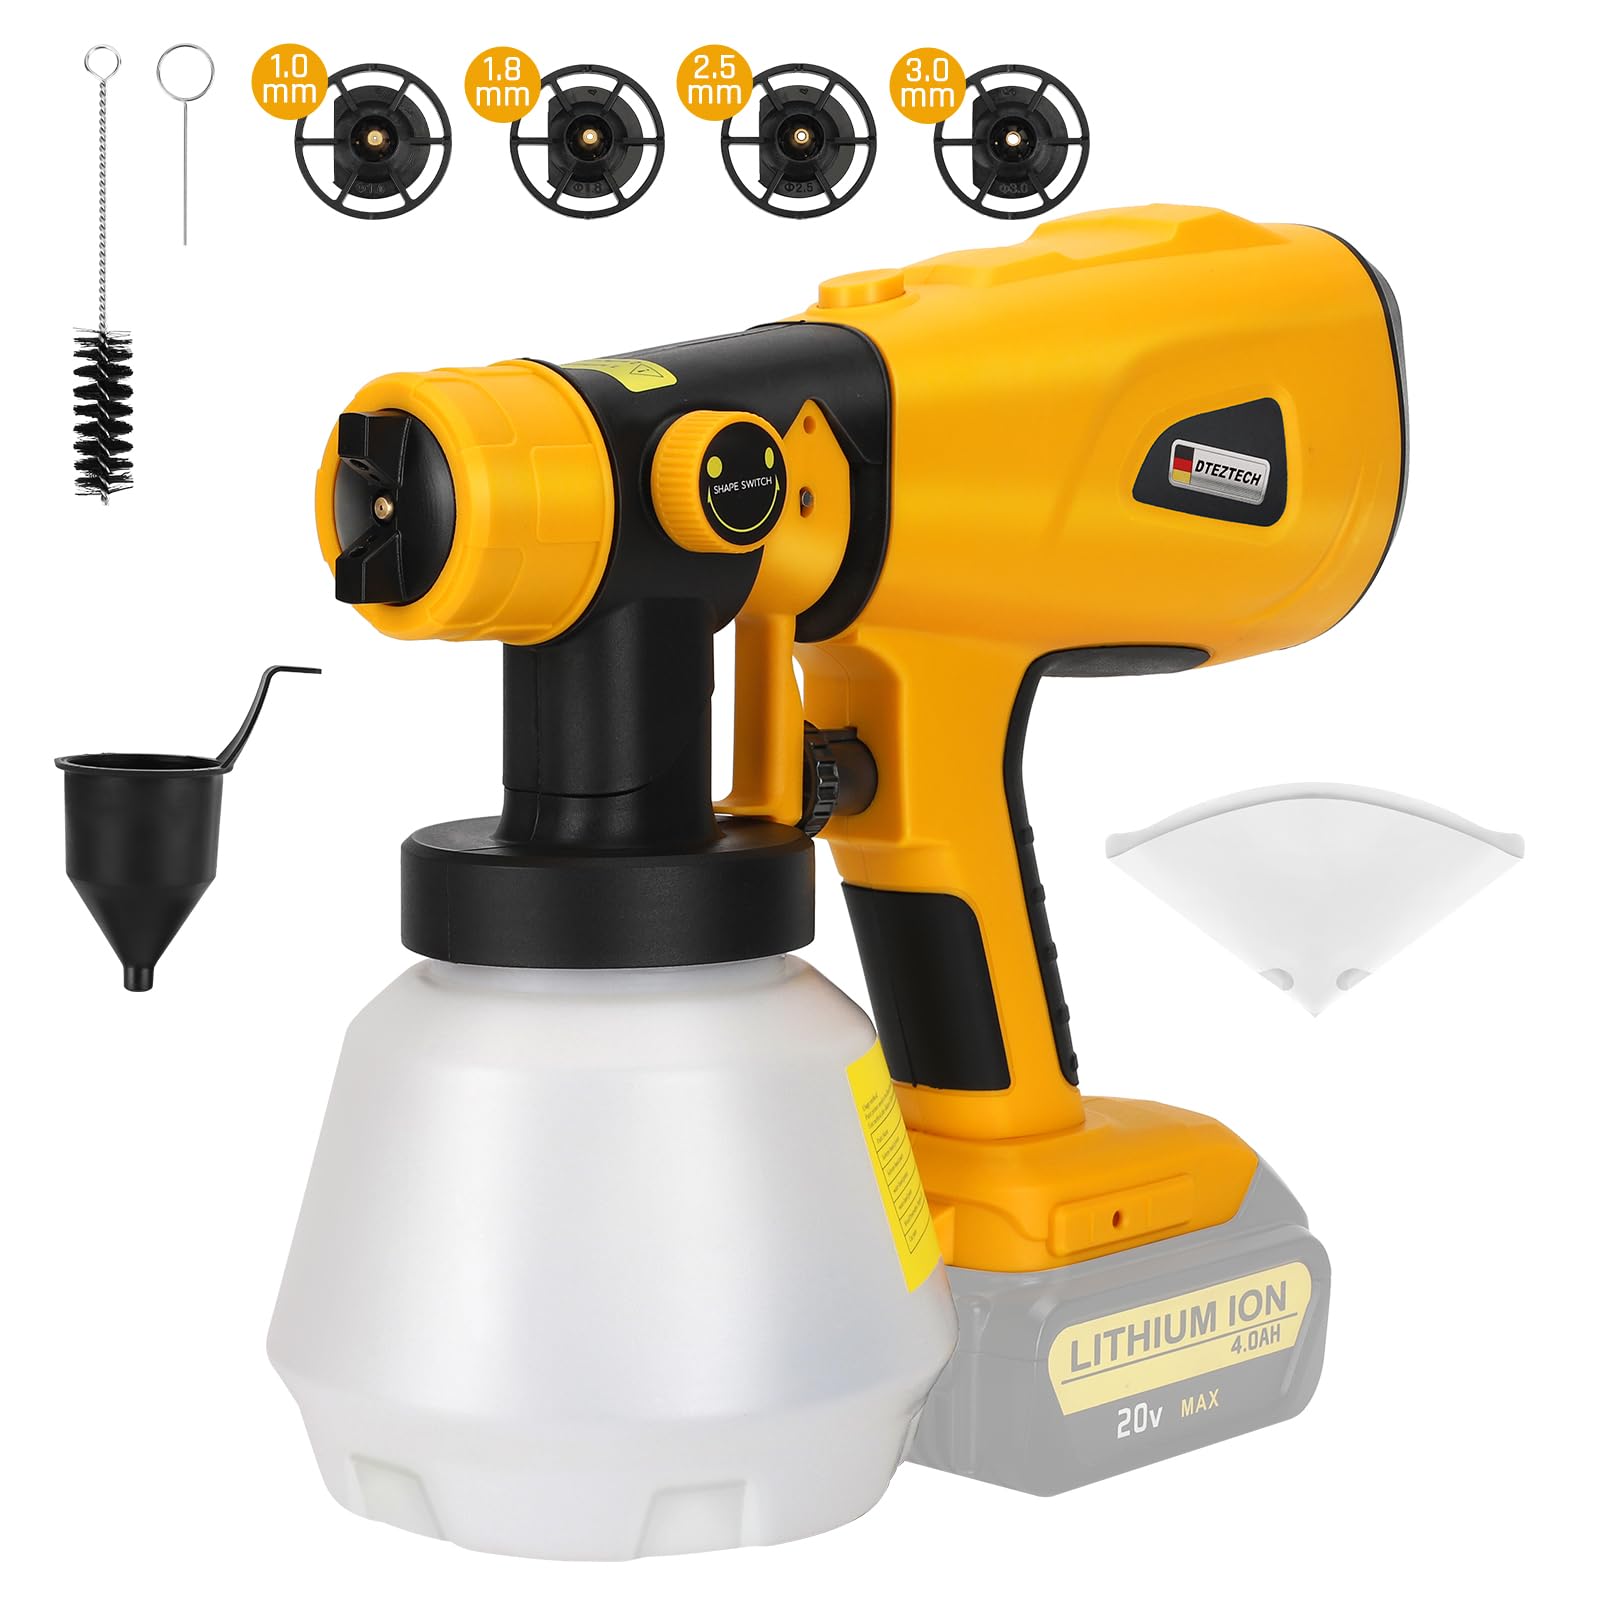 Paint Sprayer for Dewalt 20V MAX Battery, HVLP Spray Paint Gun with Brushless Motor and Copper Nozzle, 200W Cordless Paint Sprayer for Home Interior and Exterior, House Painting(Tool Only)